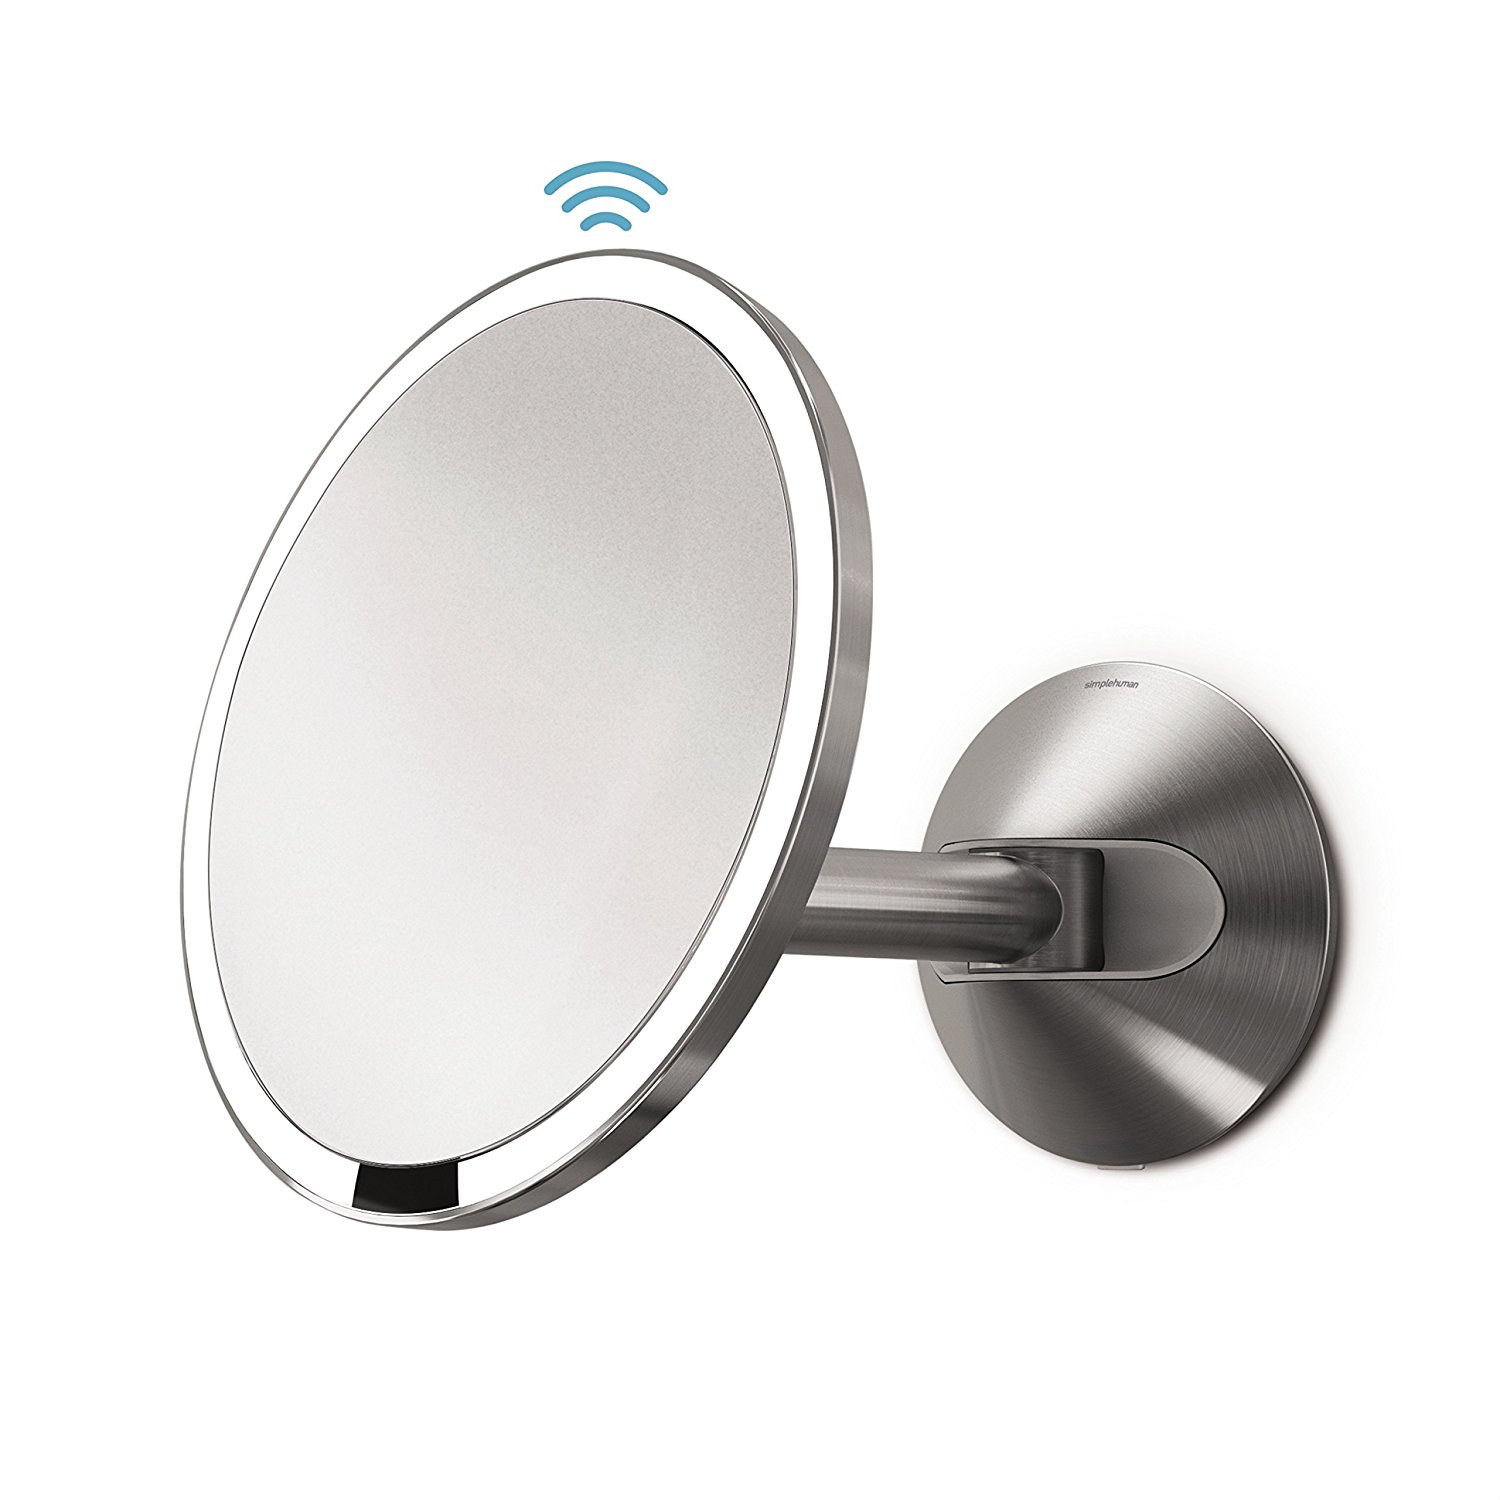 simplehuman 8 inch Wall Mount Sensor Mirror, Lighted Makeup Mirror, Hard-Wired, 5x Magnifying